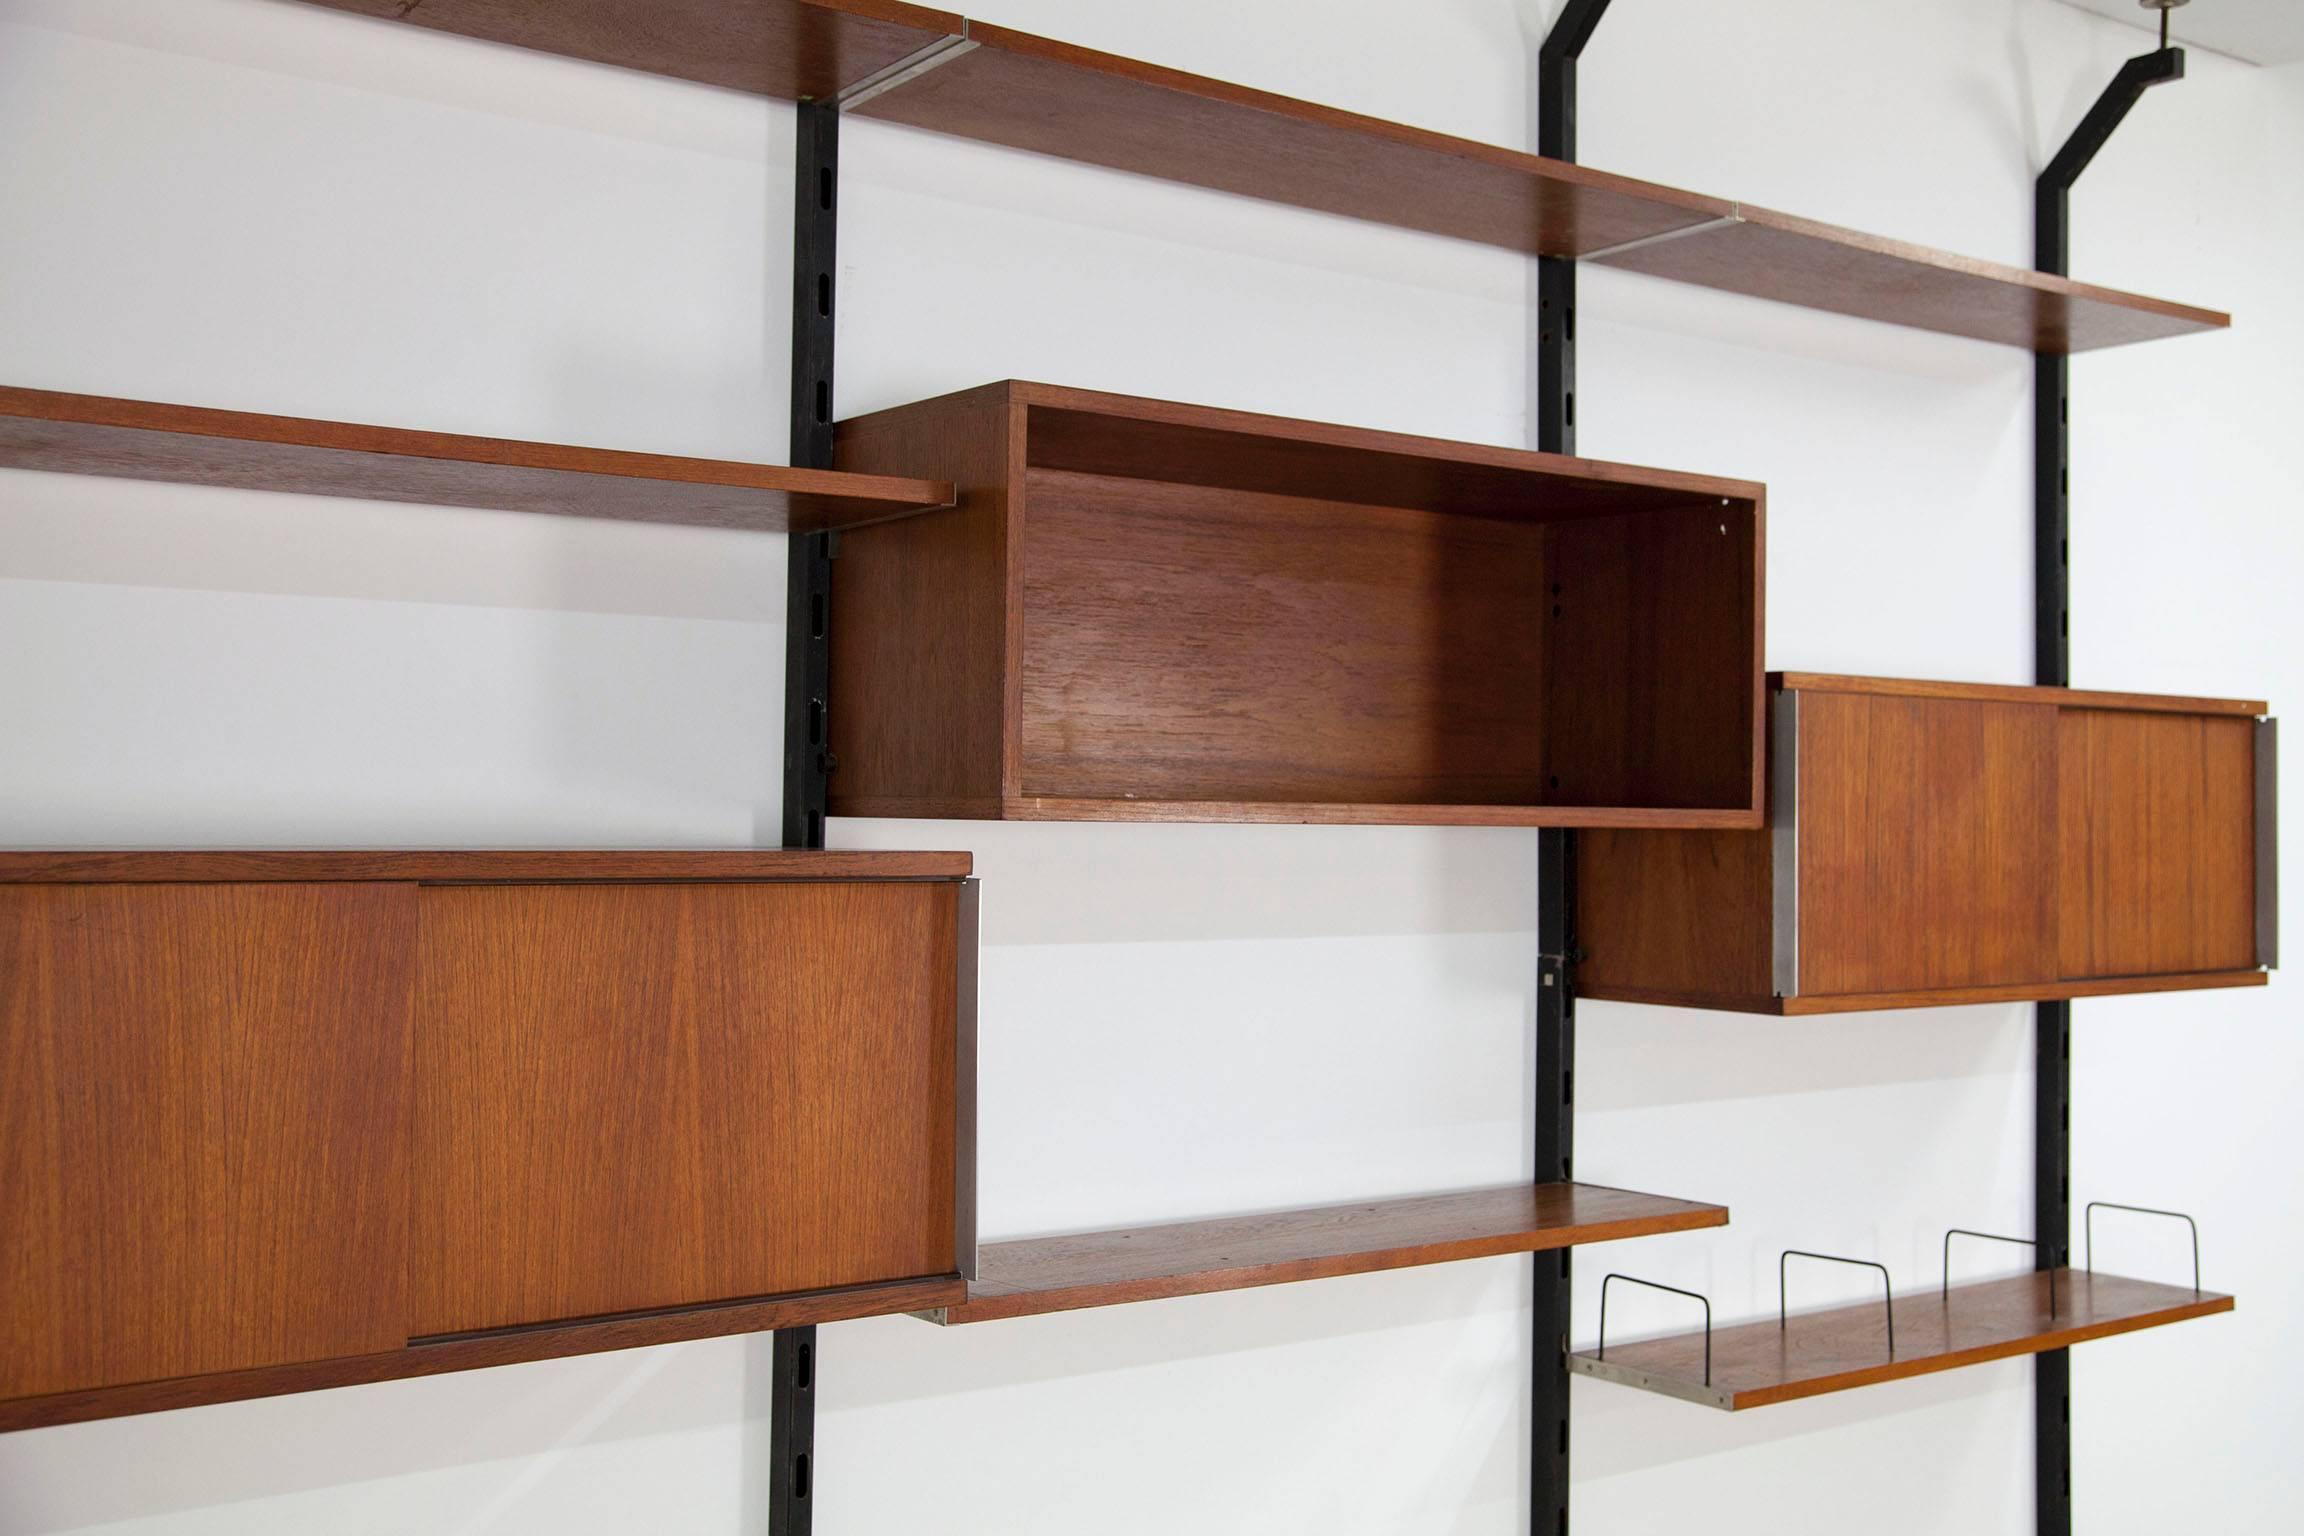 20th Century Teak Wall-Unit by Ico Parisi for Mim Roma Model Urio For Sale